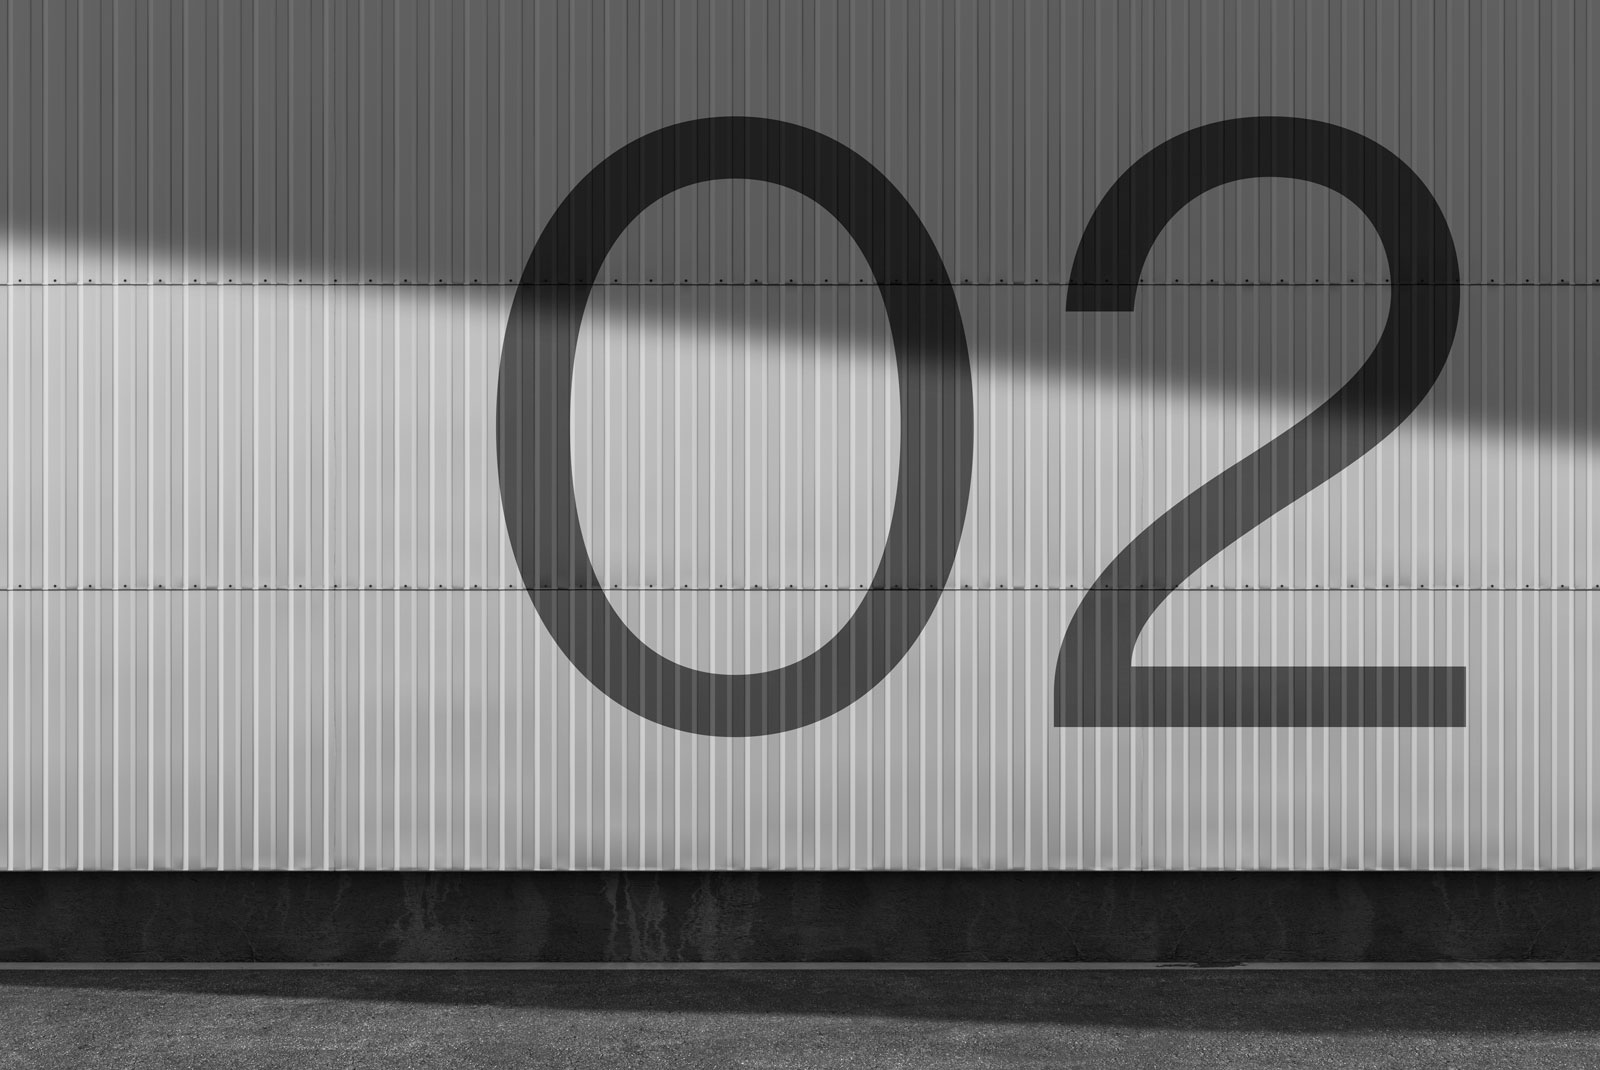 Industrial style font mockup on metal wall, showcasing bold number 02 design, perfect for poster, logo, and graphic design projects.